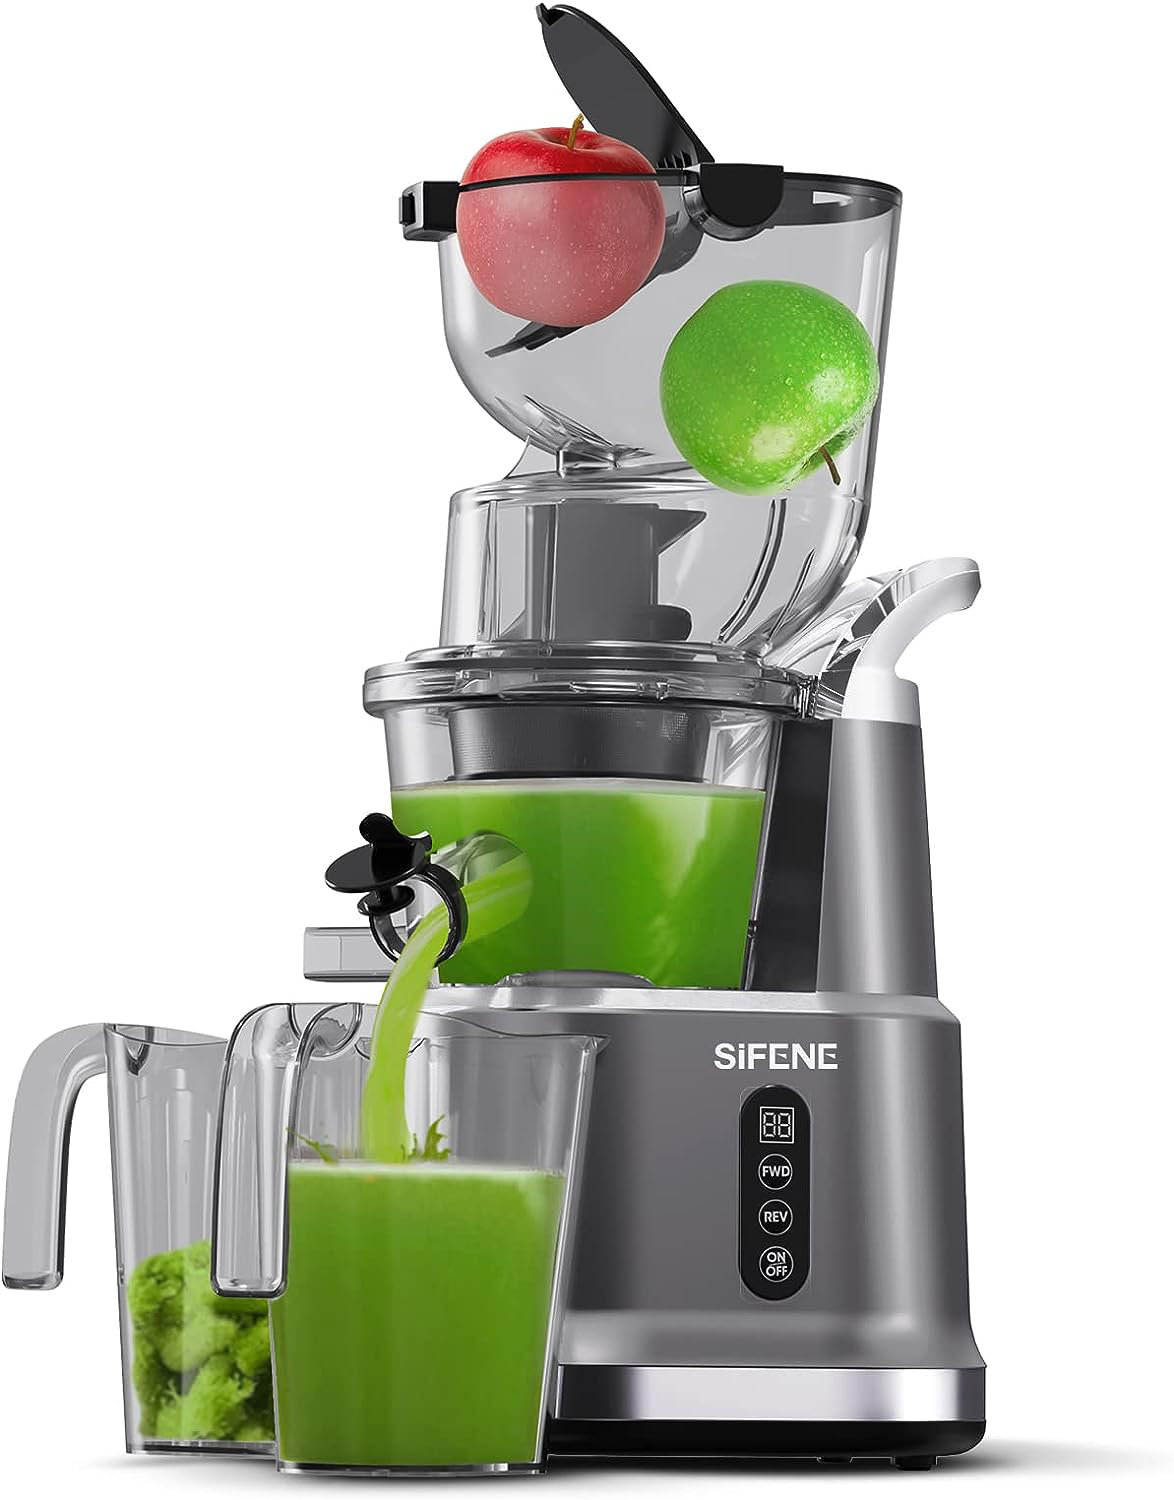 Cold Pressed Juicer vs Centrifugal Juicer - Which Is Better? - Love Your  Health